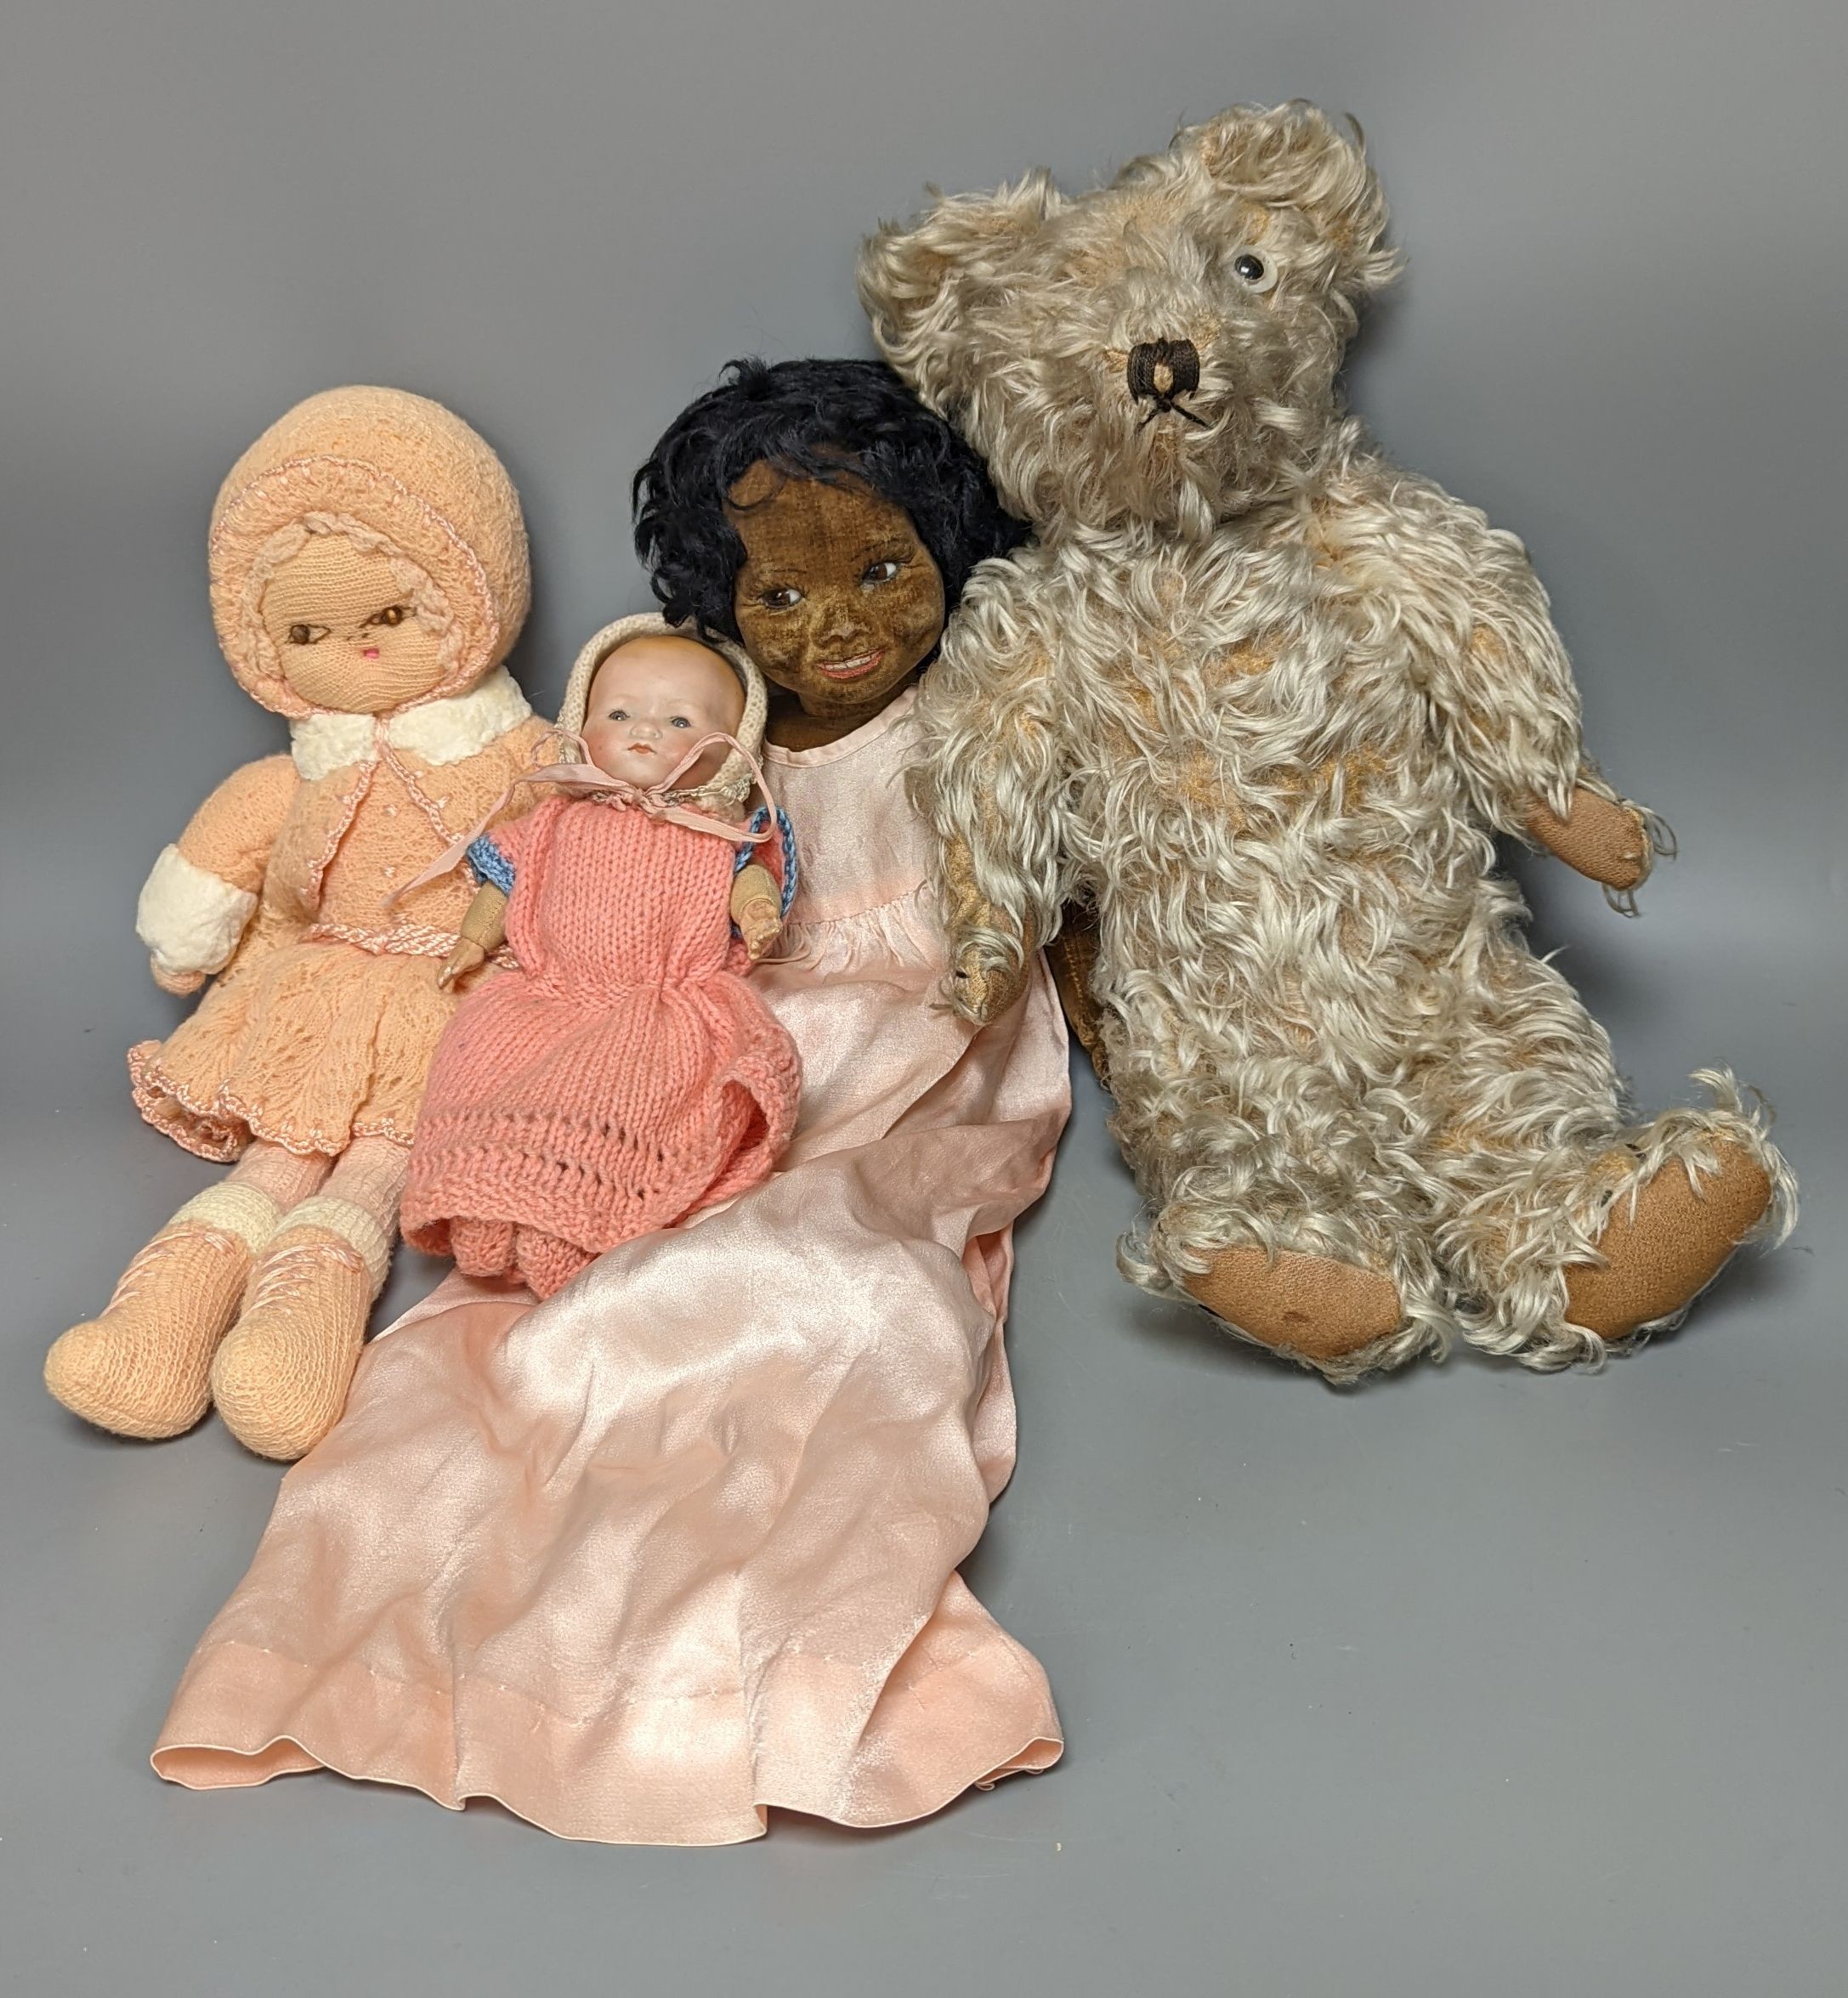 A Nora Wellings type mulatto doll and an Armmand Marseille doll 341, teddy etc, mulatto doll 43cms high